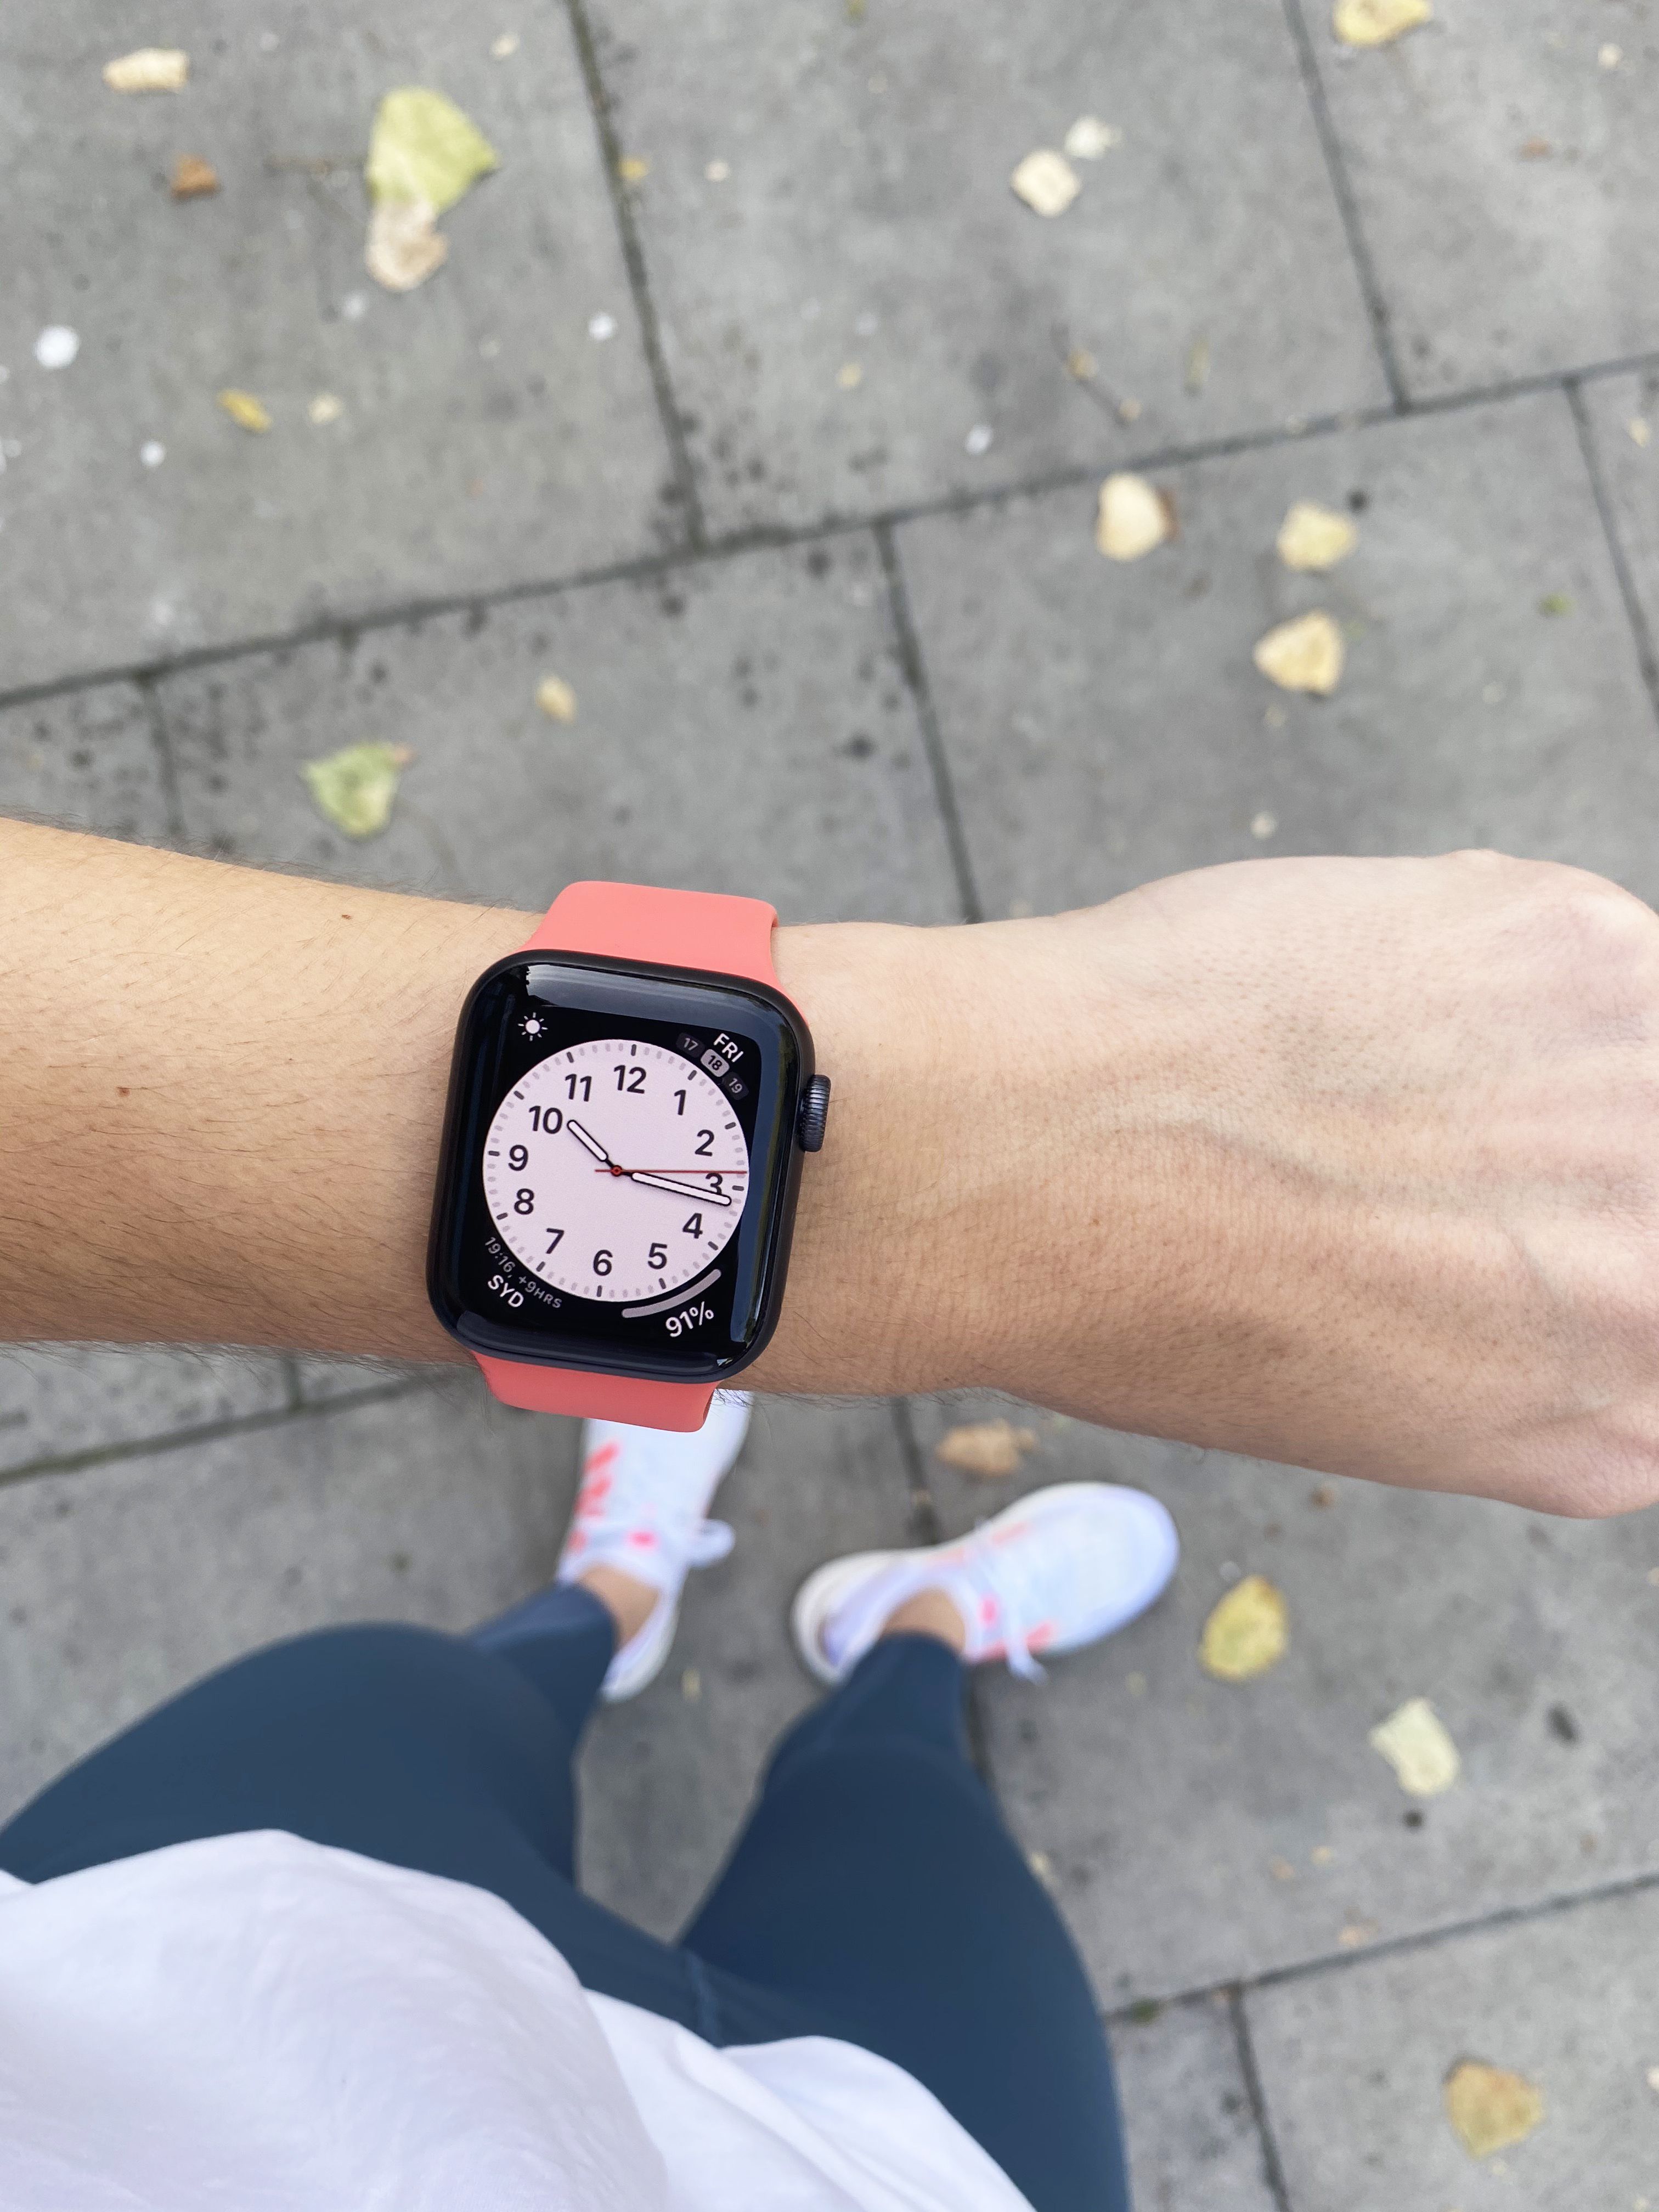 Apple Watch Series 6 Review: Is an Upgrade Worth It?